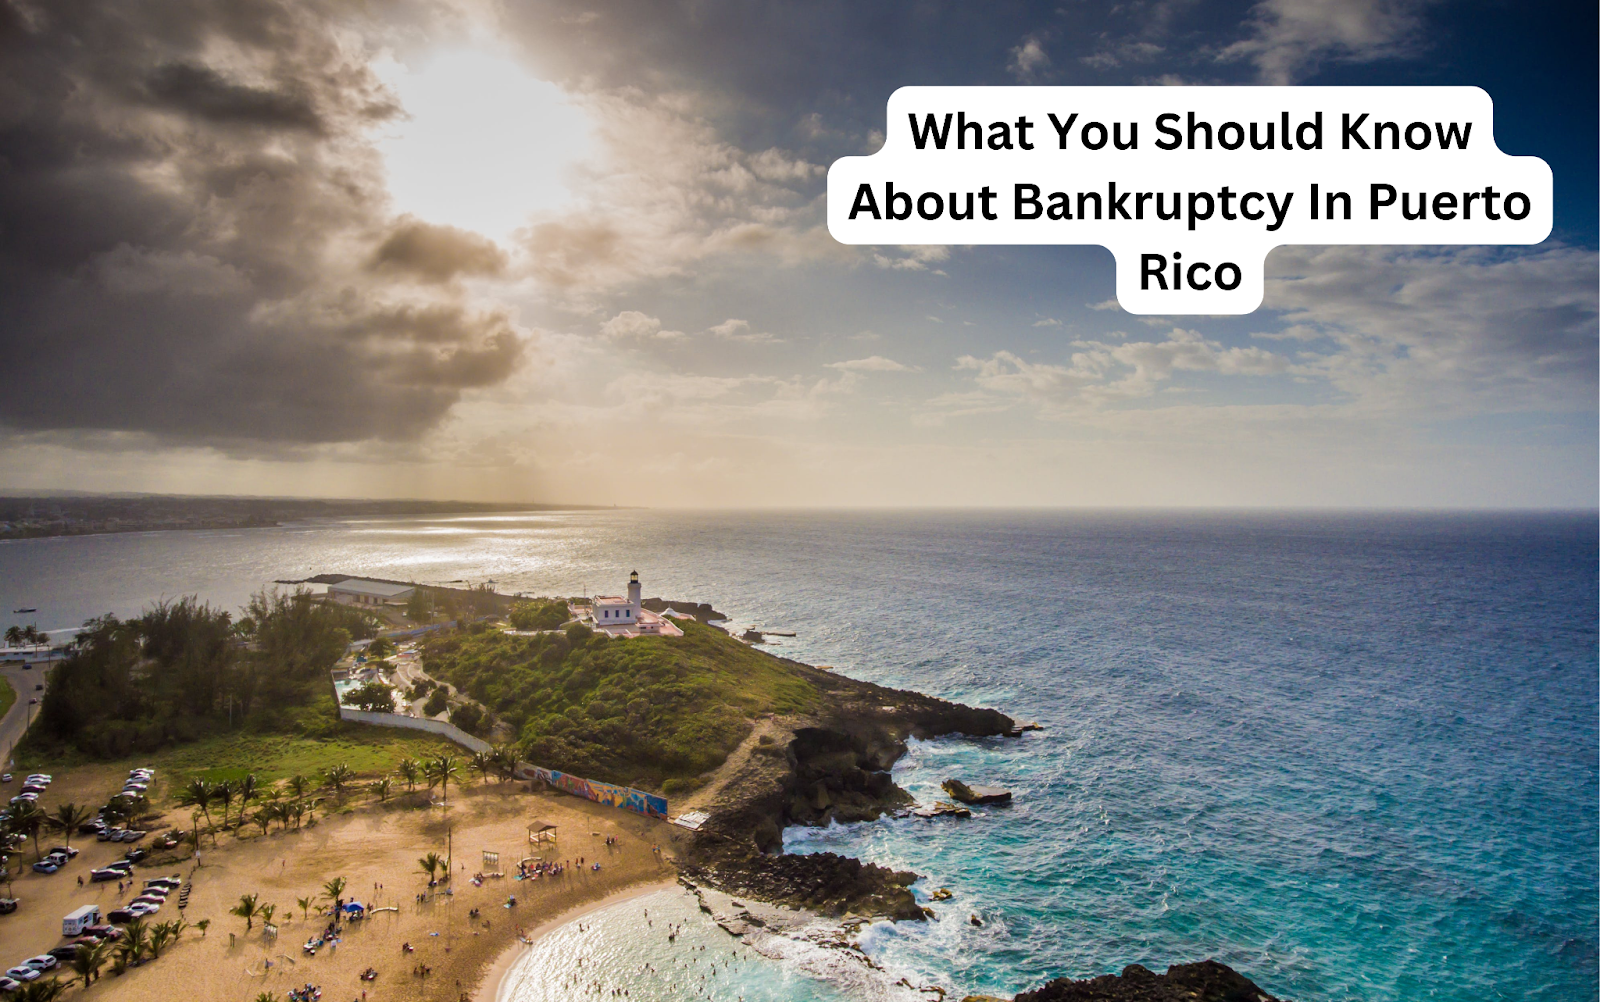 What You Should Know About Bankruptcy In Puerto Rico